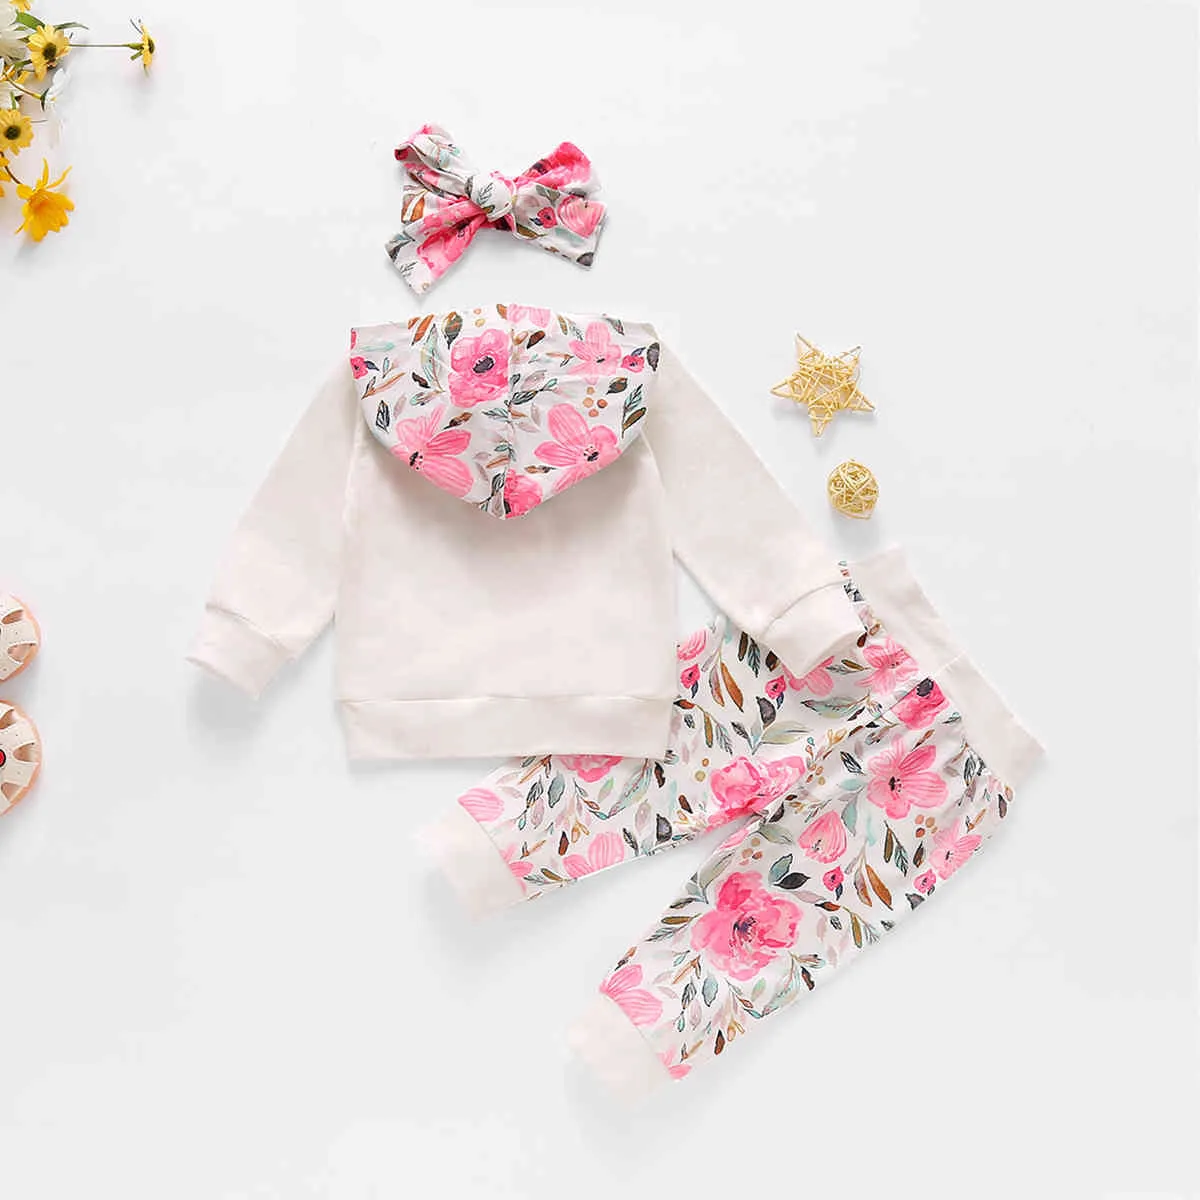 3-24M Flower born Infant Baby Girls Clothes Set Autumn Winter Hooded Sweatshirts Pants Headband Floral Outfits 210515